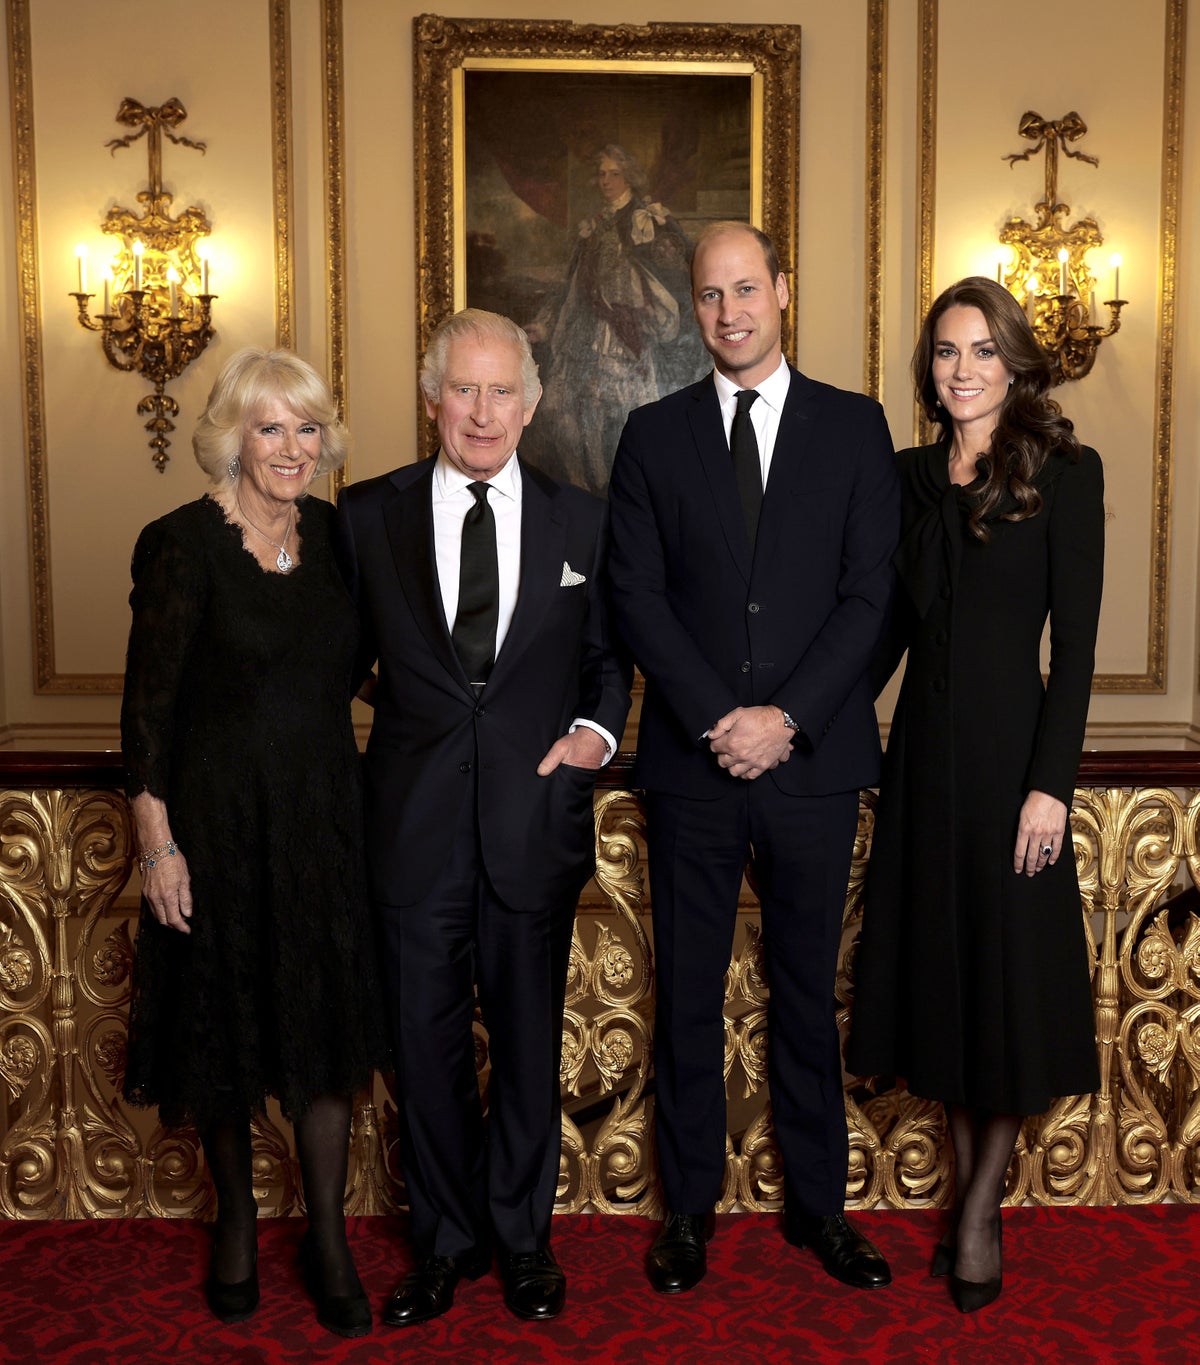 Smiling Charles, William, Camilla and Catherine captured in new image